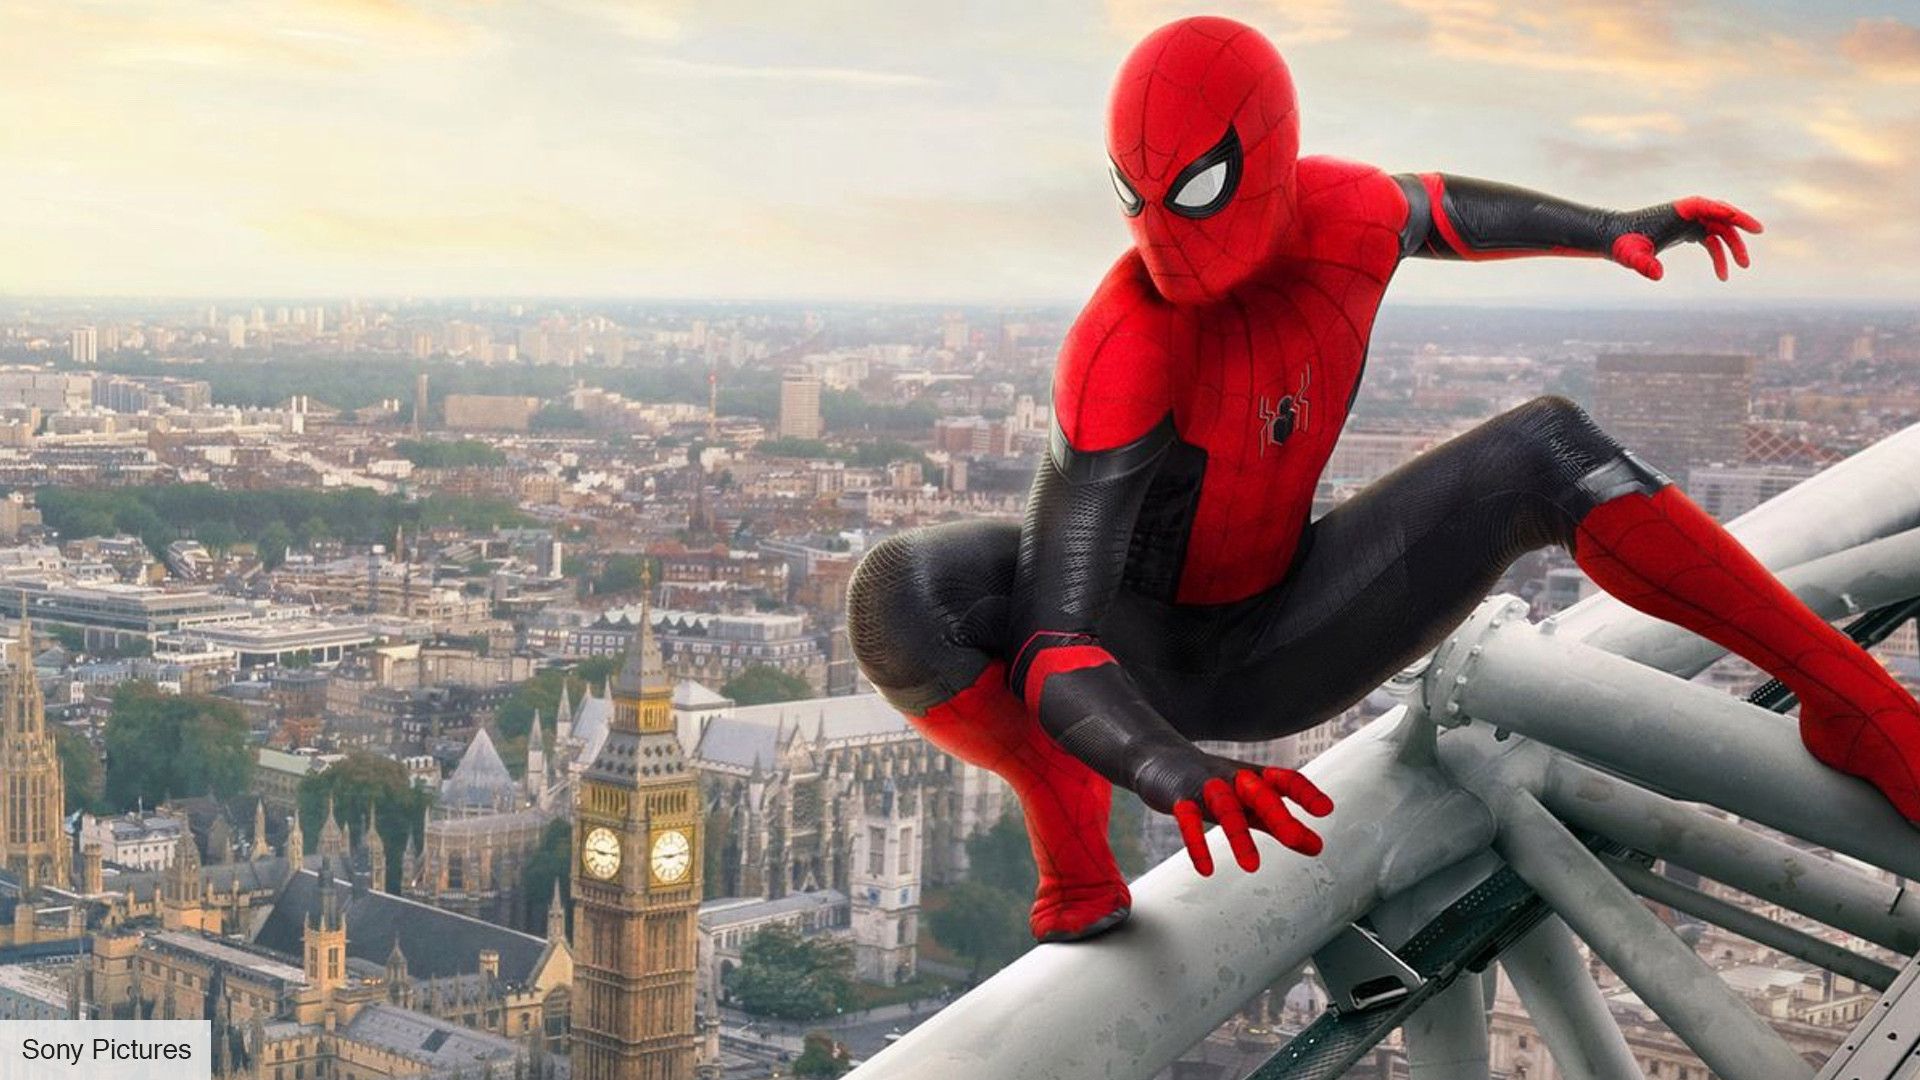 The trailer for Spider-Man: No Way Home is out and is that Doc Ock we see?